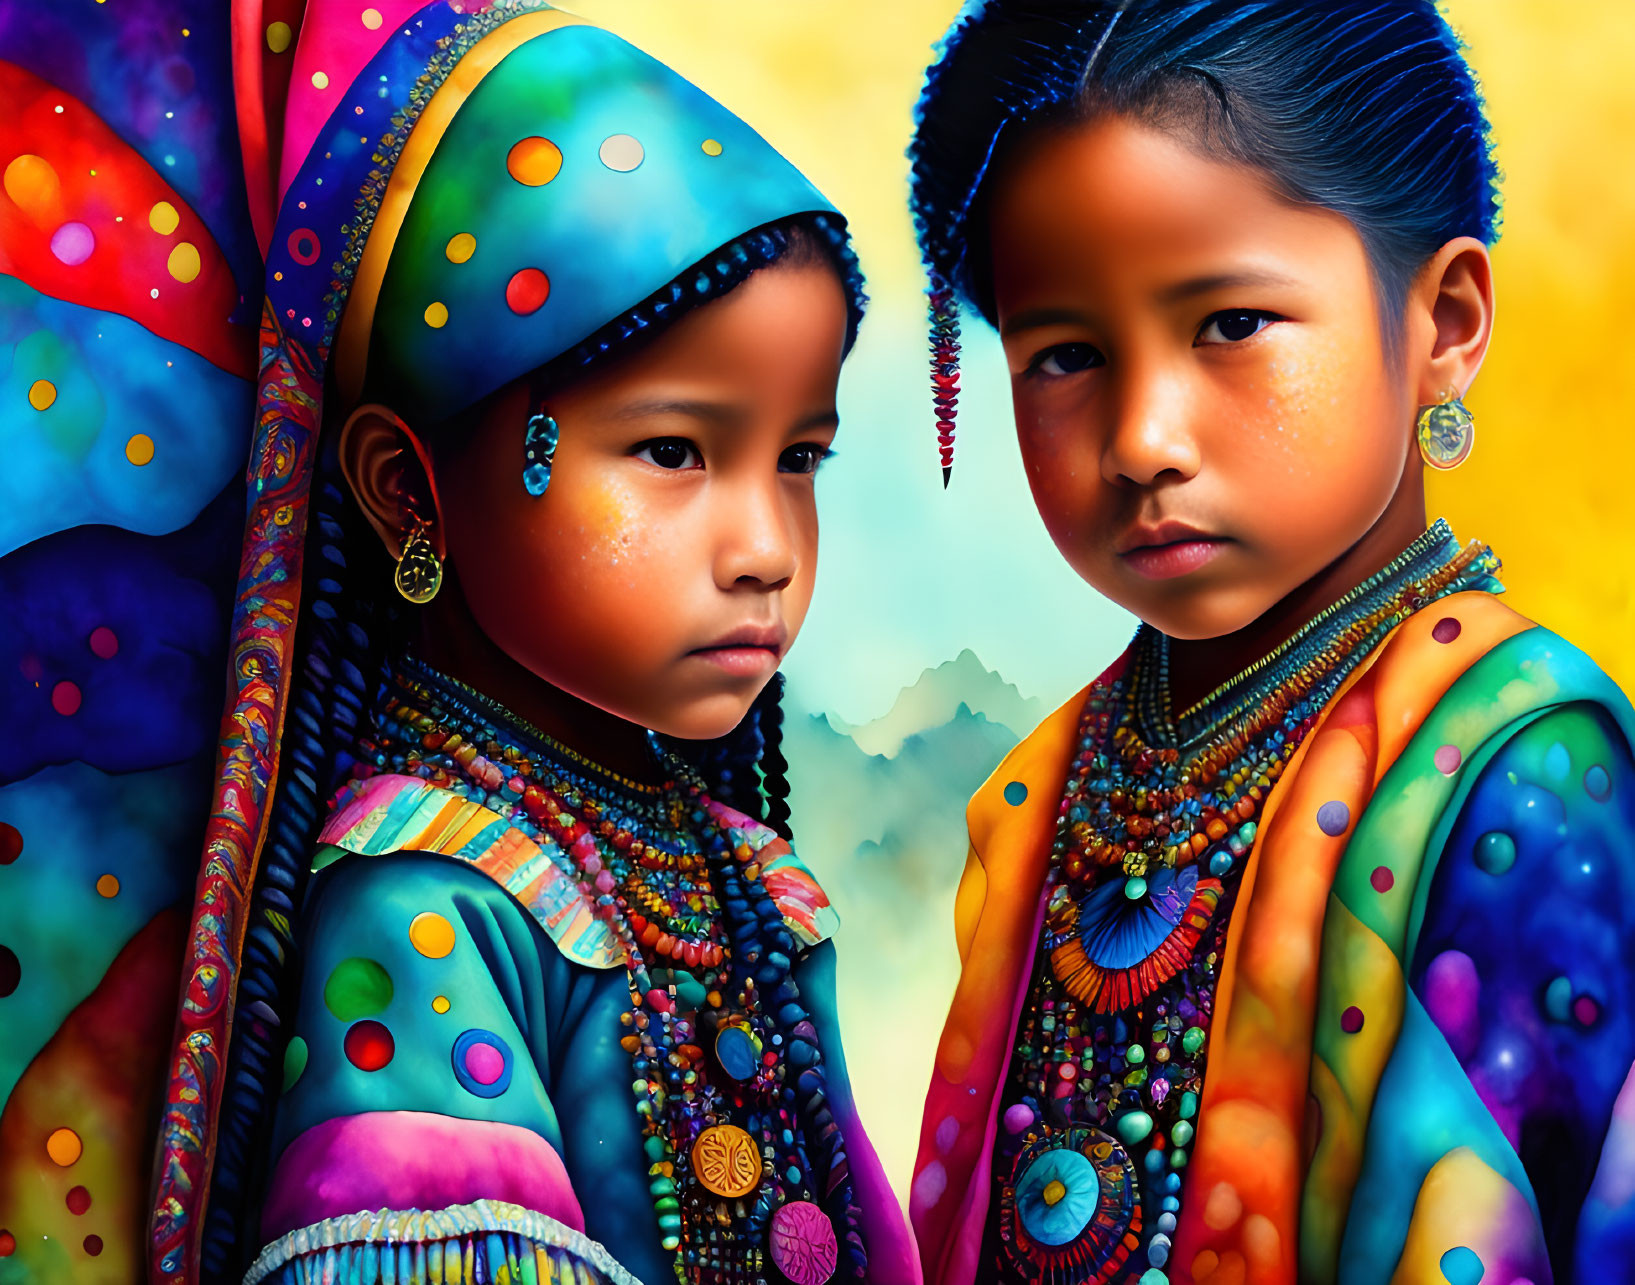 Children in traditional attire with headscarves and necklaces against colorful background